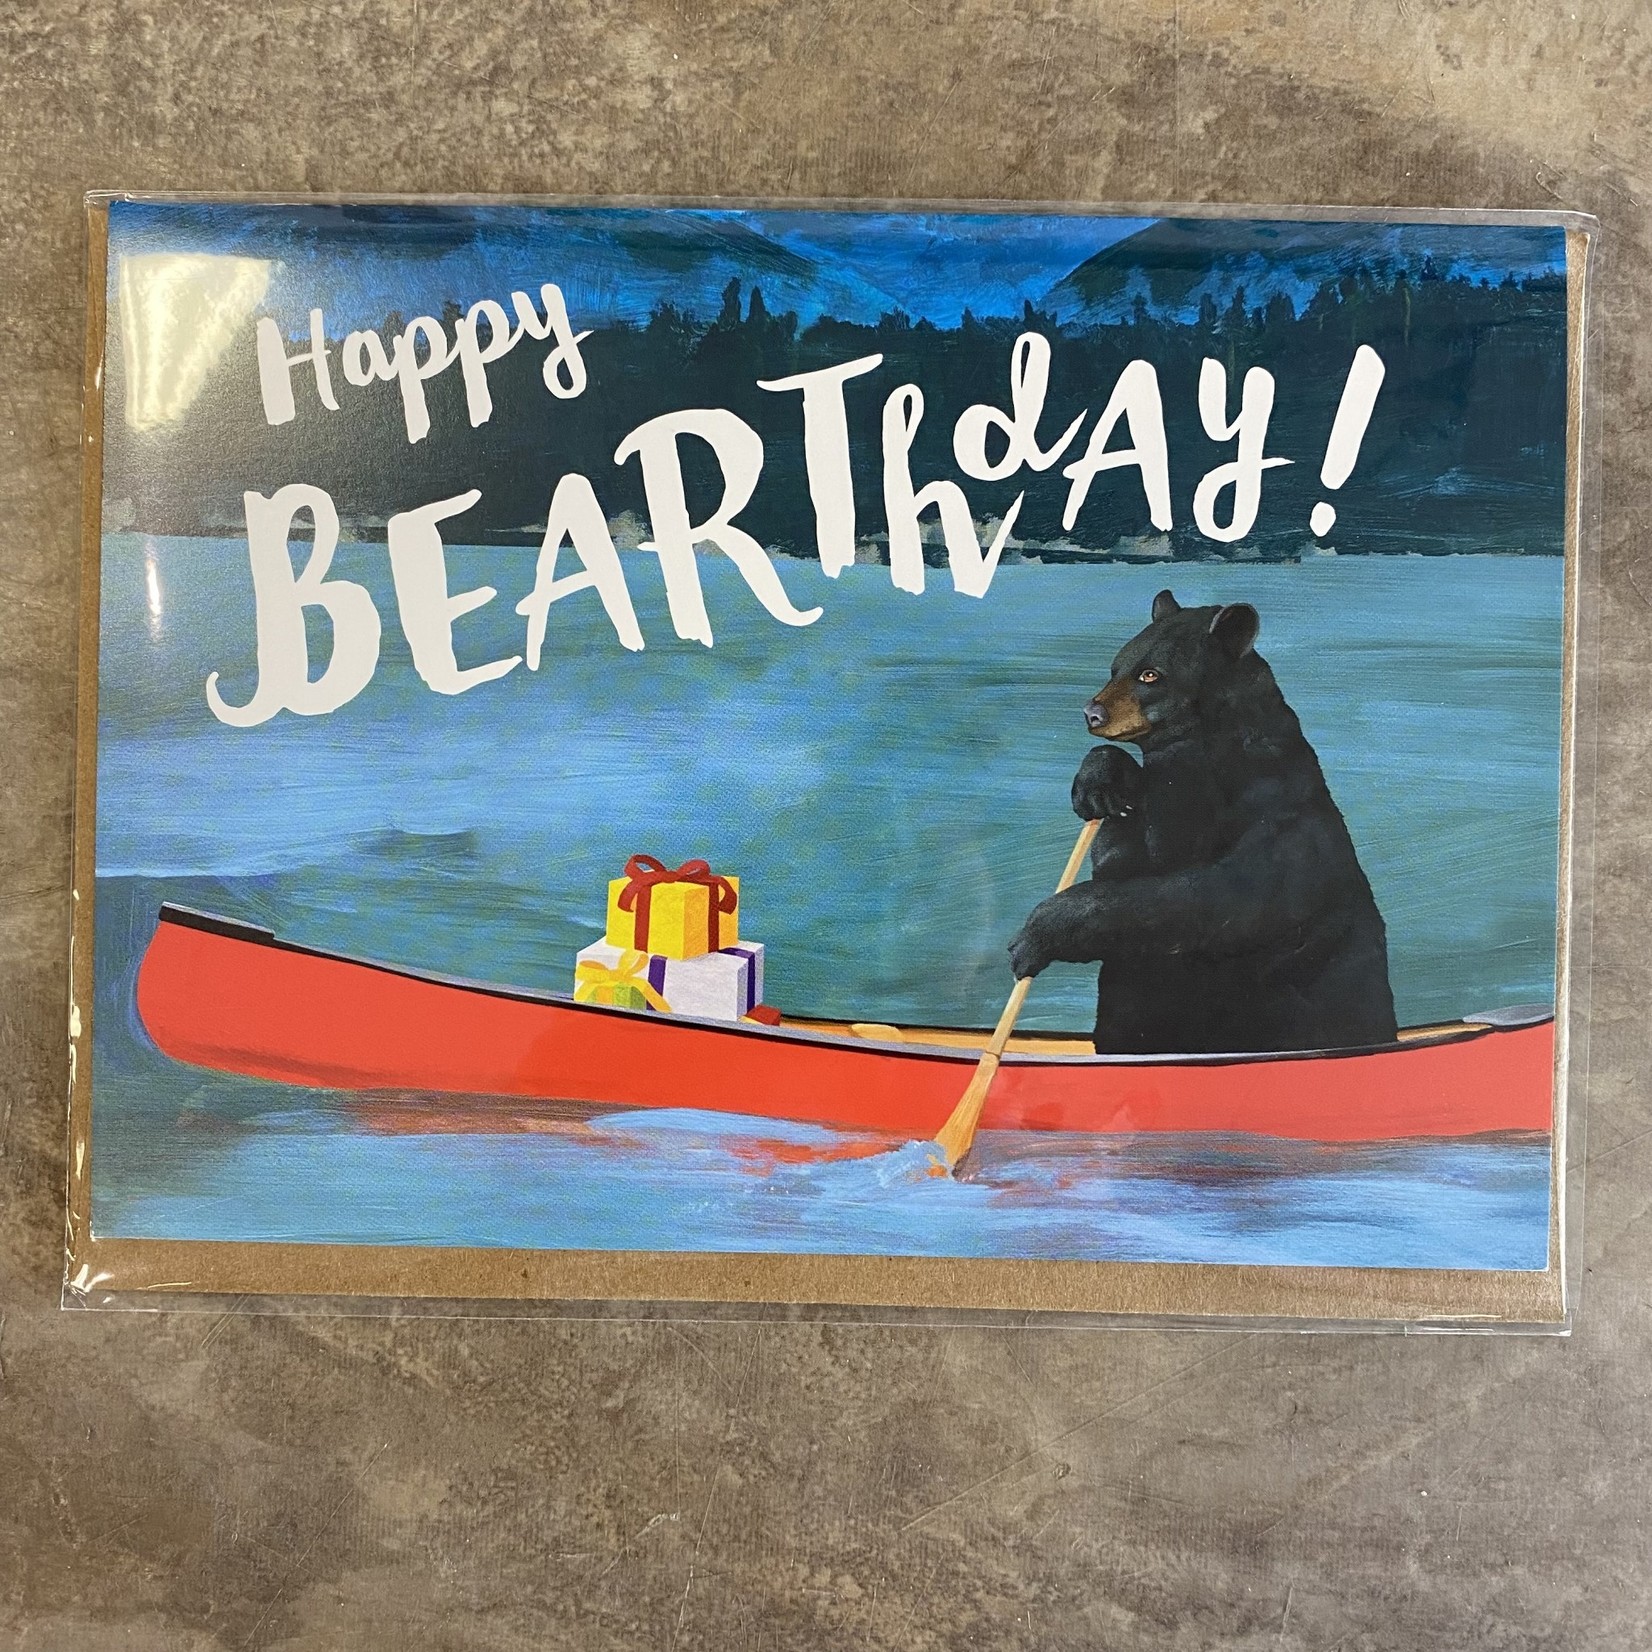 23rd Day Greeting Cards - Happy Bearthday